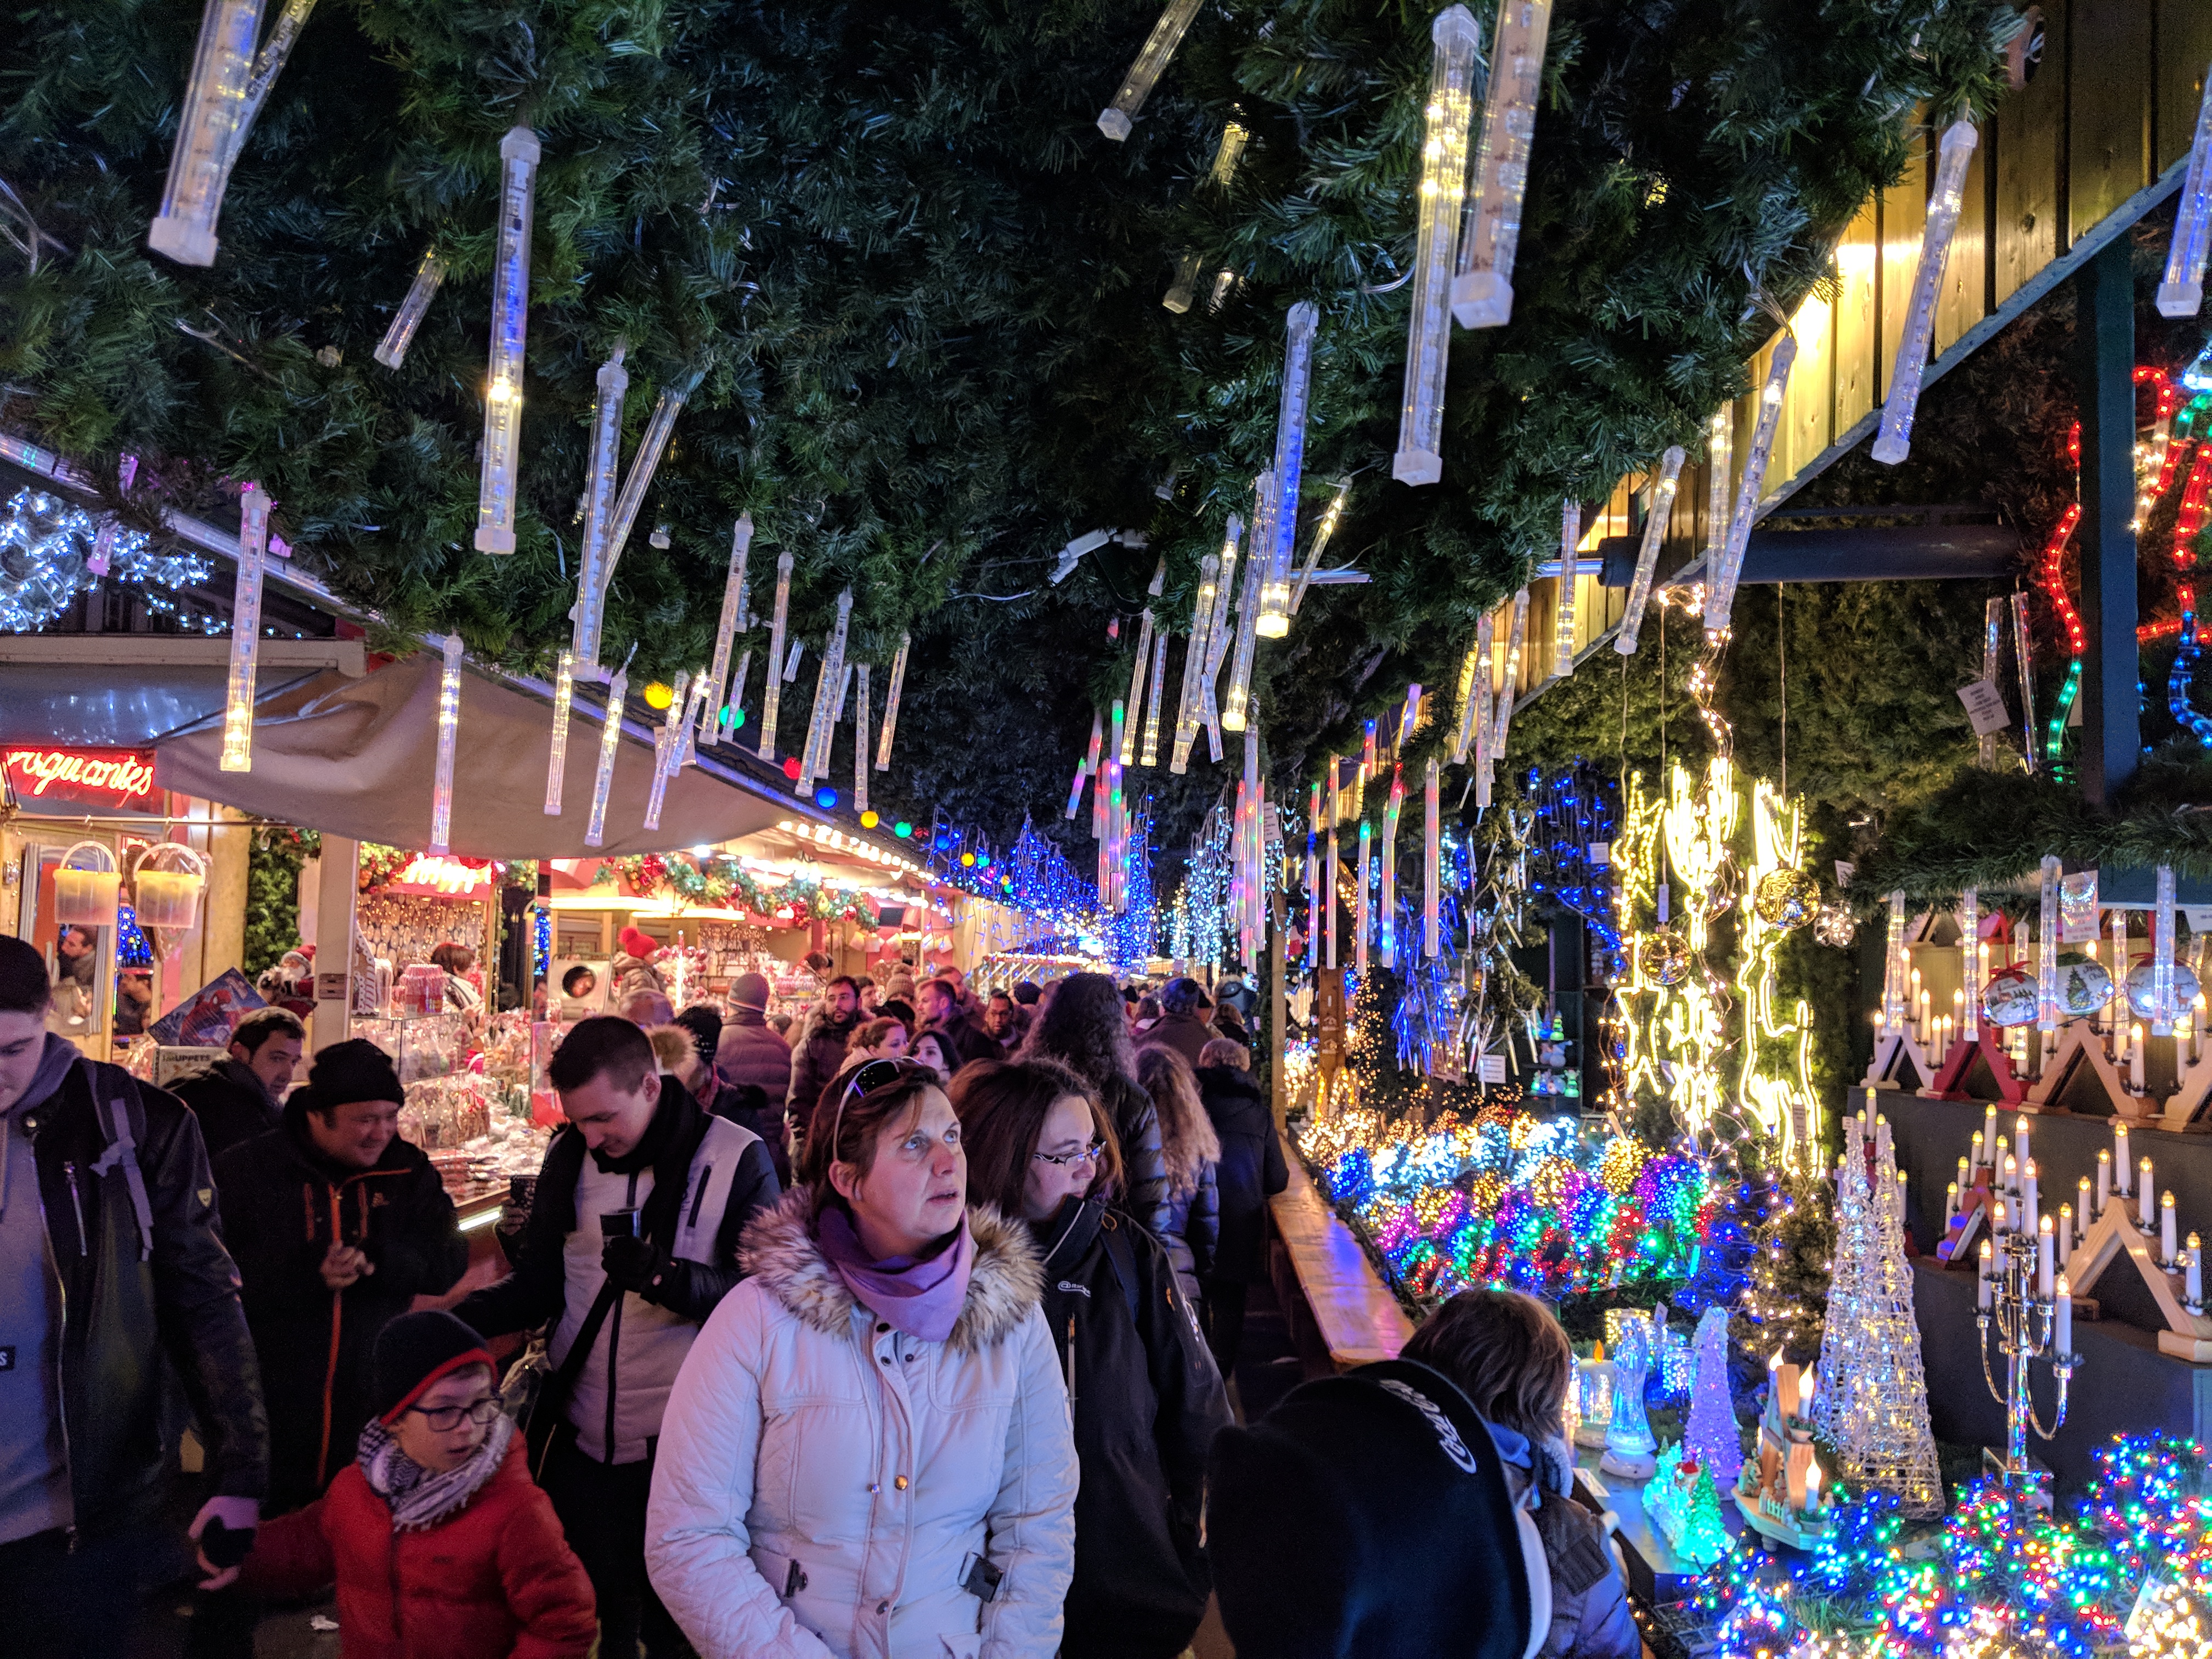 A Christmas market in Strasbourg